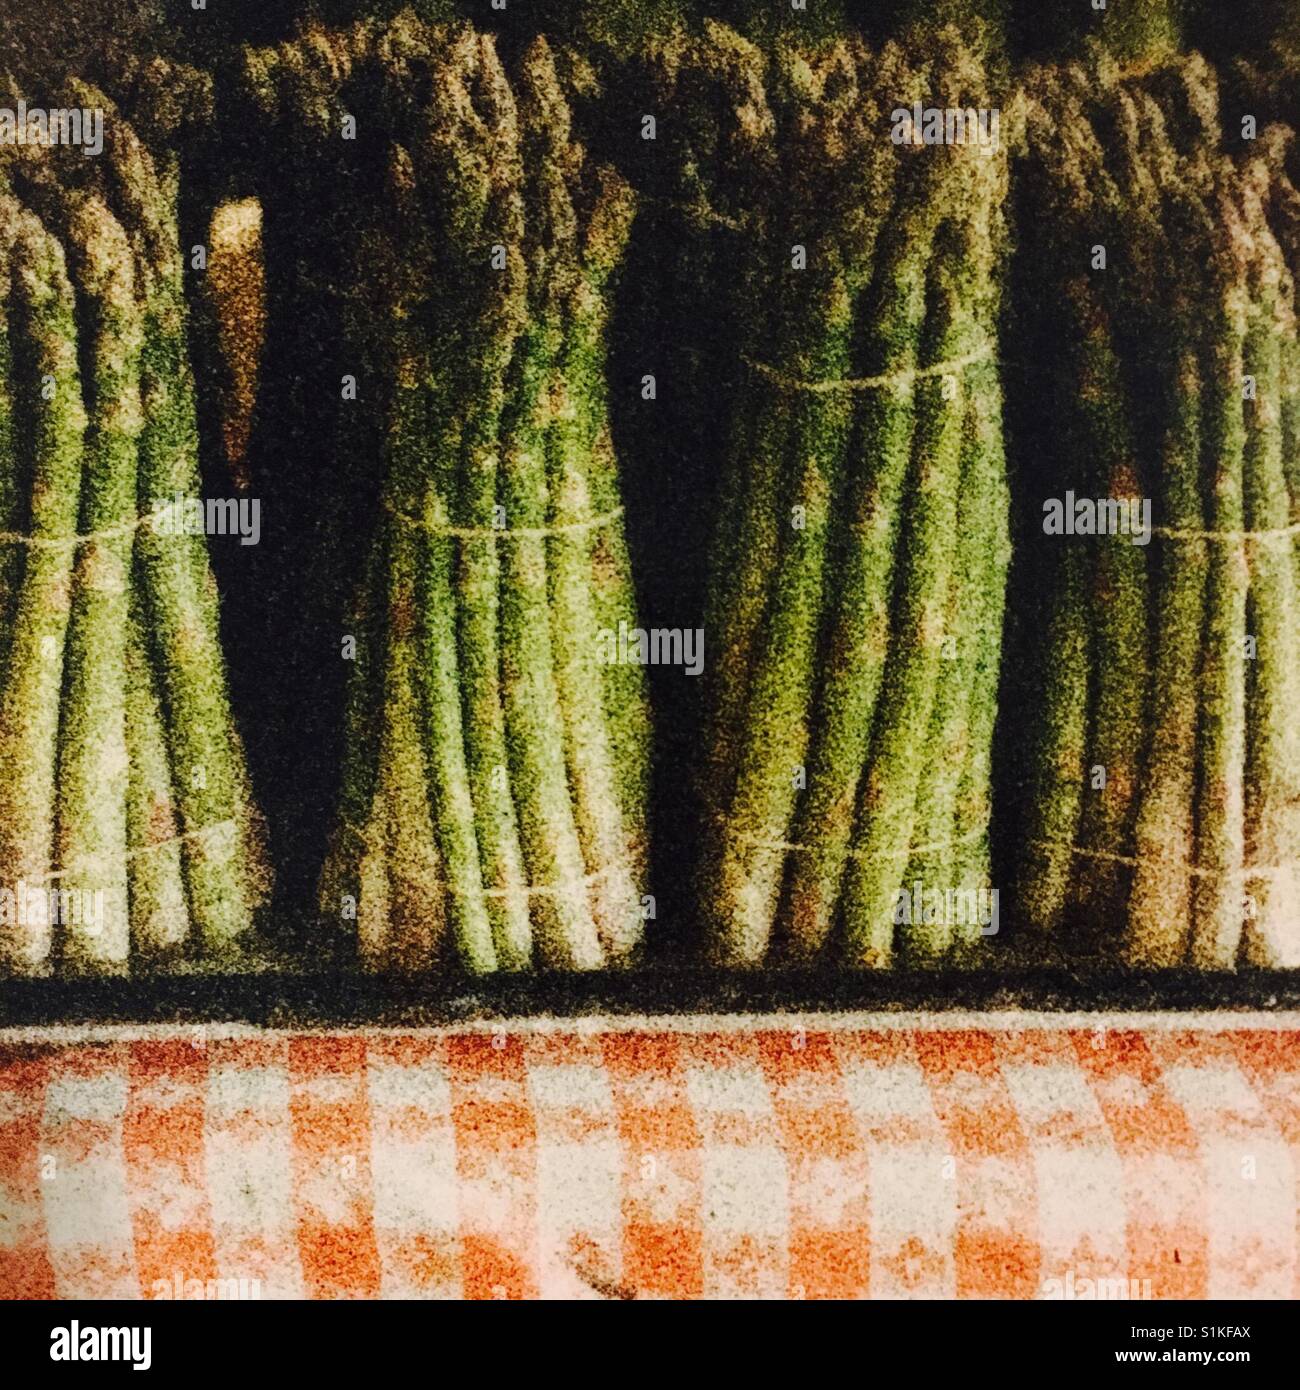 Asparagus stalks on red and white table cloth at Maine farm stand Stock Photo